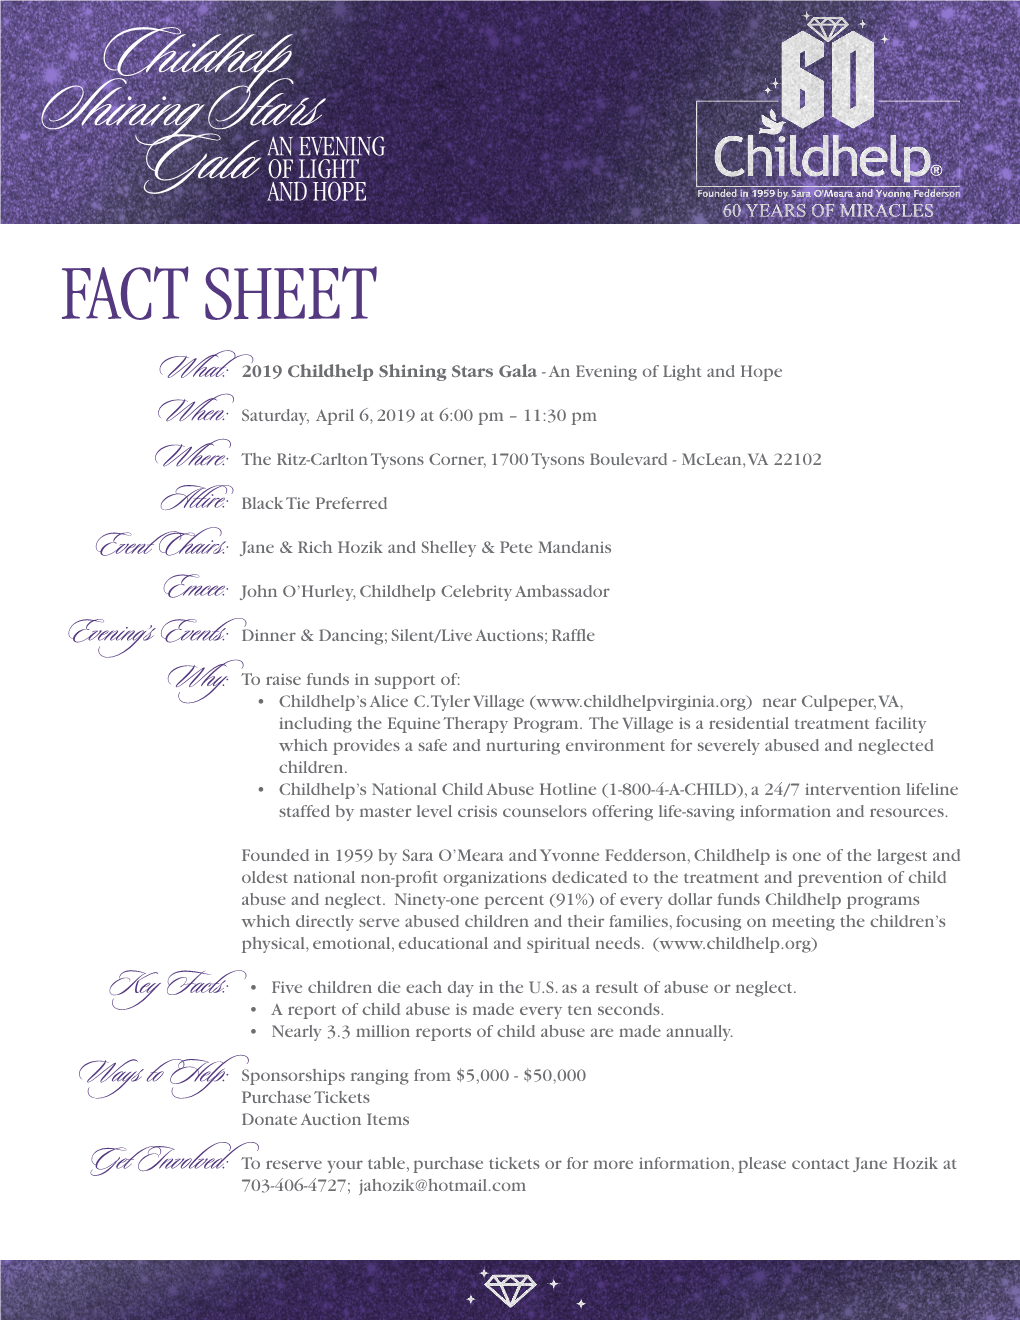 FACT SHEET What: 2019 Childhelp Shining Stars Gala - an Evening of Light and Hope When: Saturday, April 6, 2019 at 6:00 Pm – 11:30 Pm